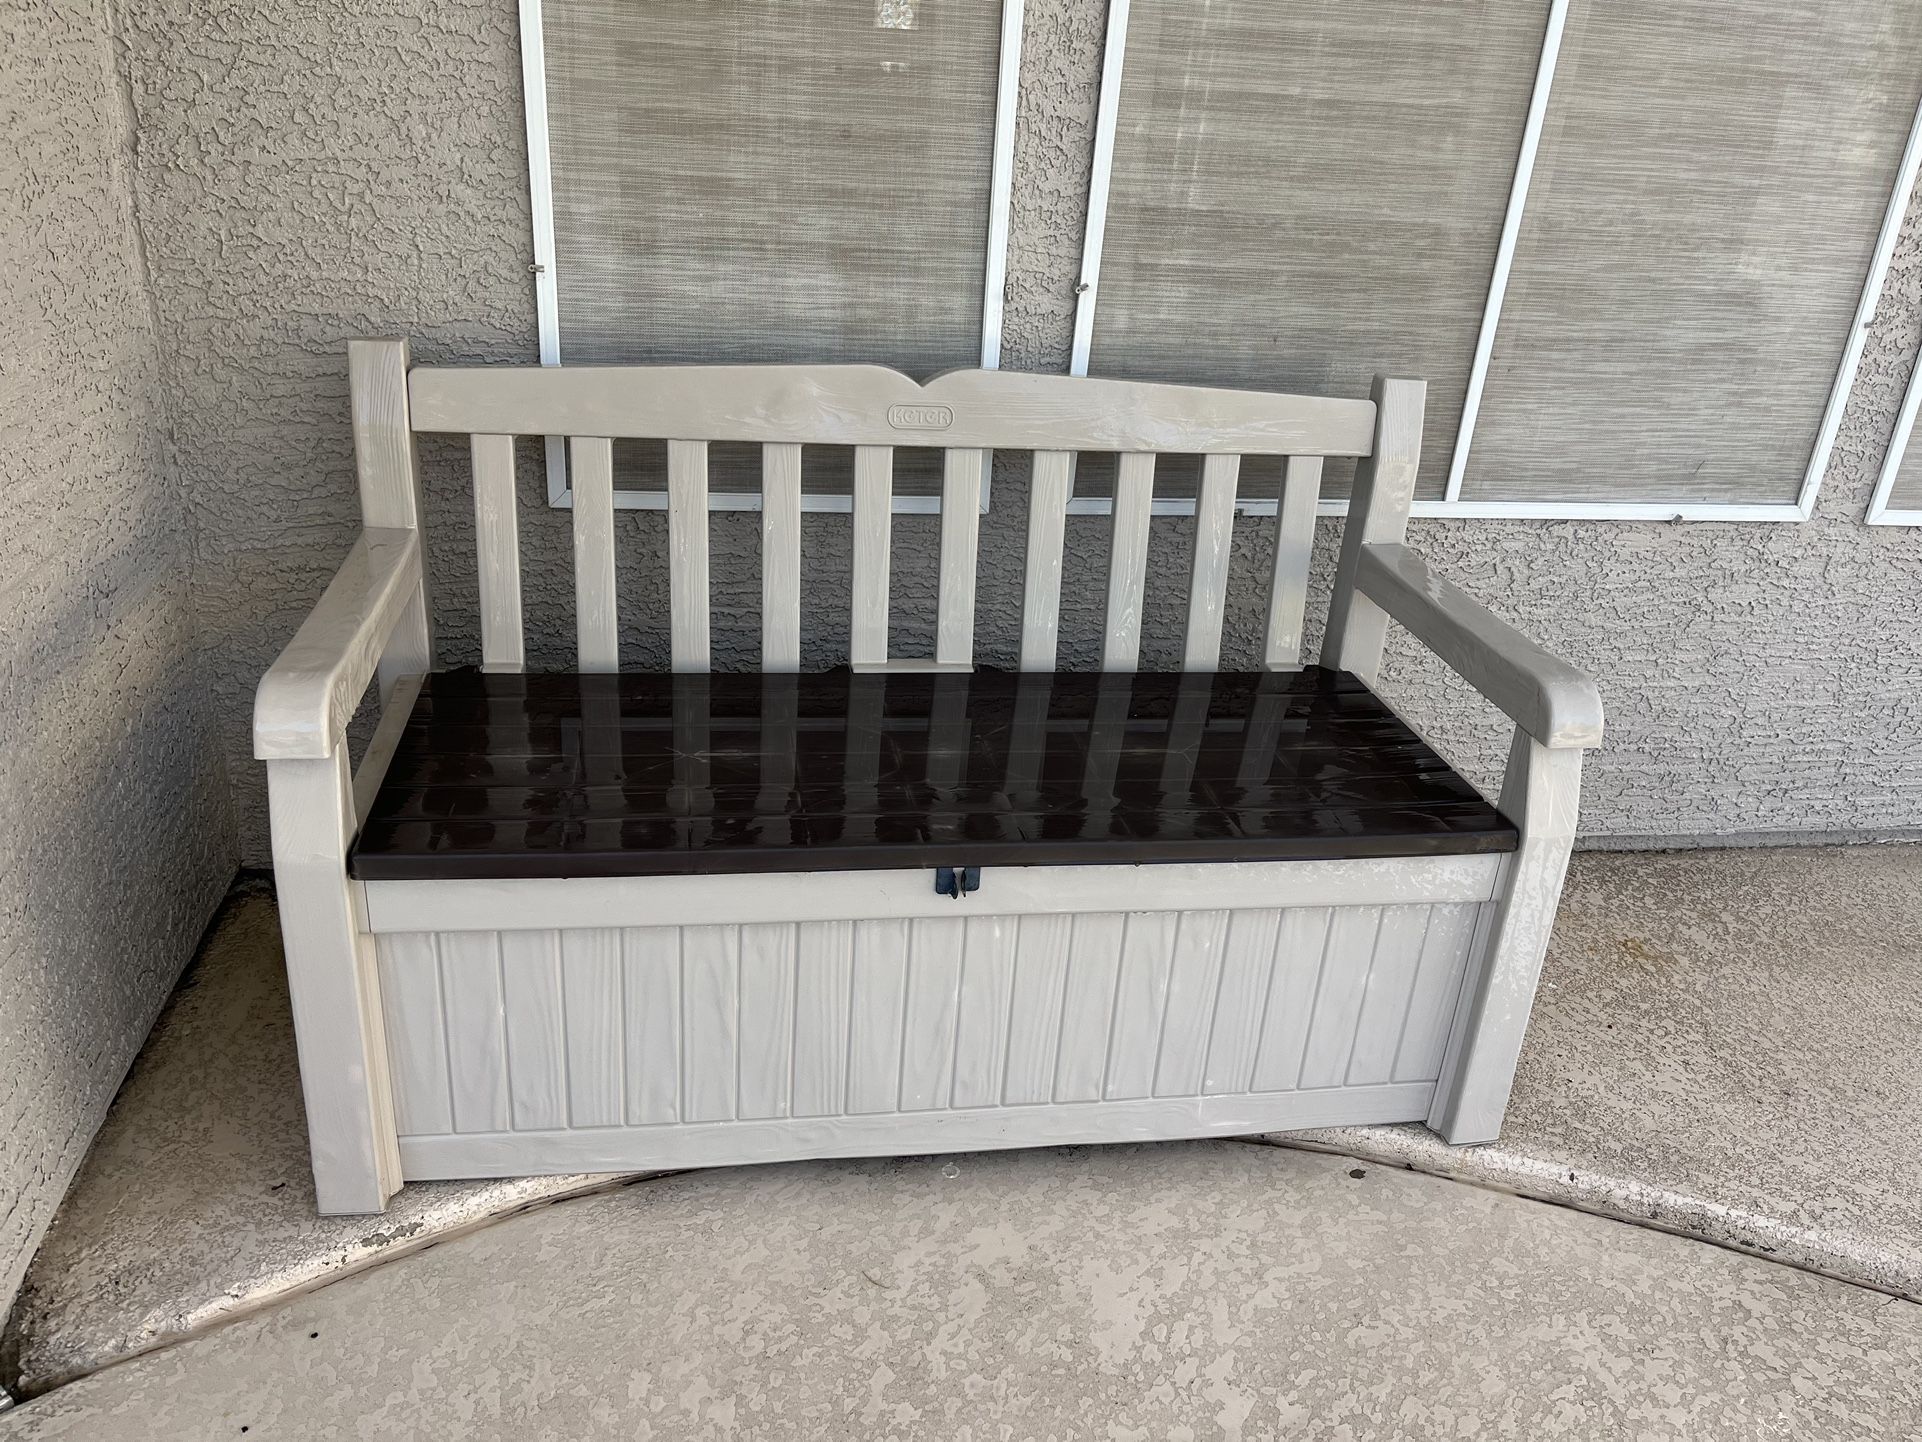 Outdoor Storage Used For Pool Items 